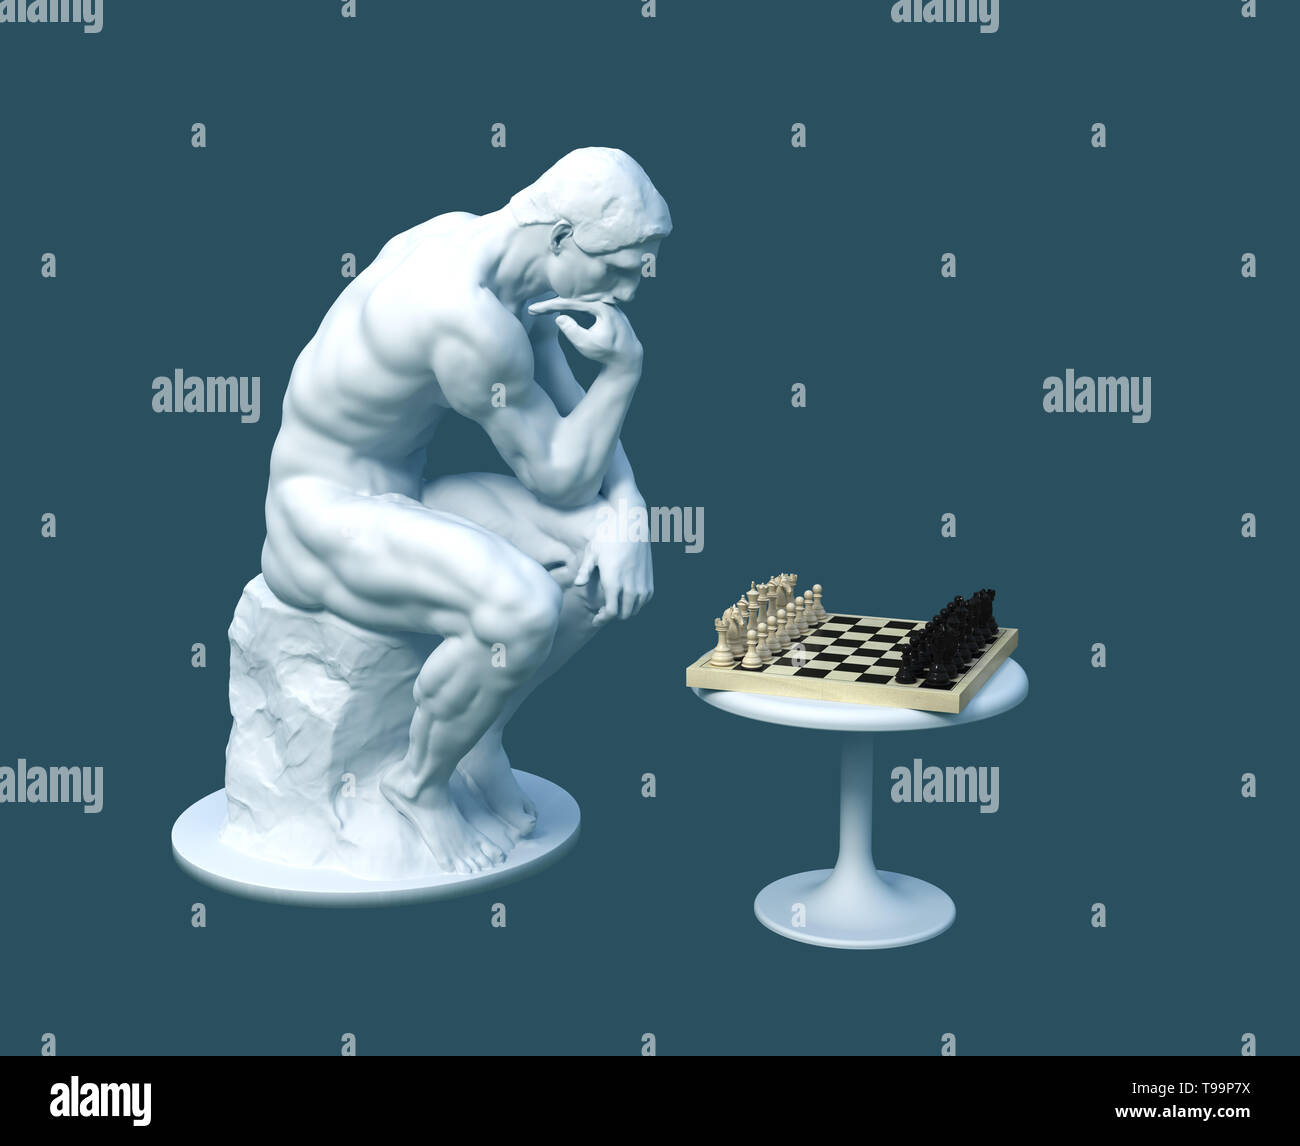 Sculpture Thinker Pondering The Chess Game On Blue Background. 3D Illustration. Stock Photo